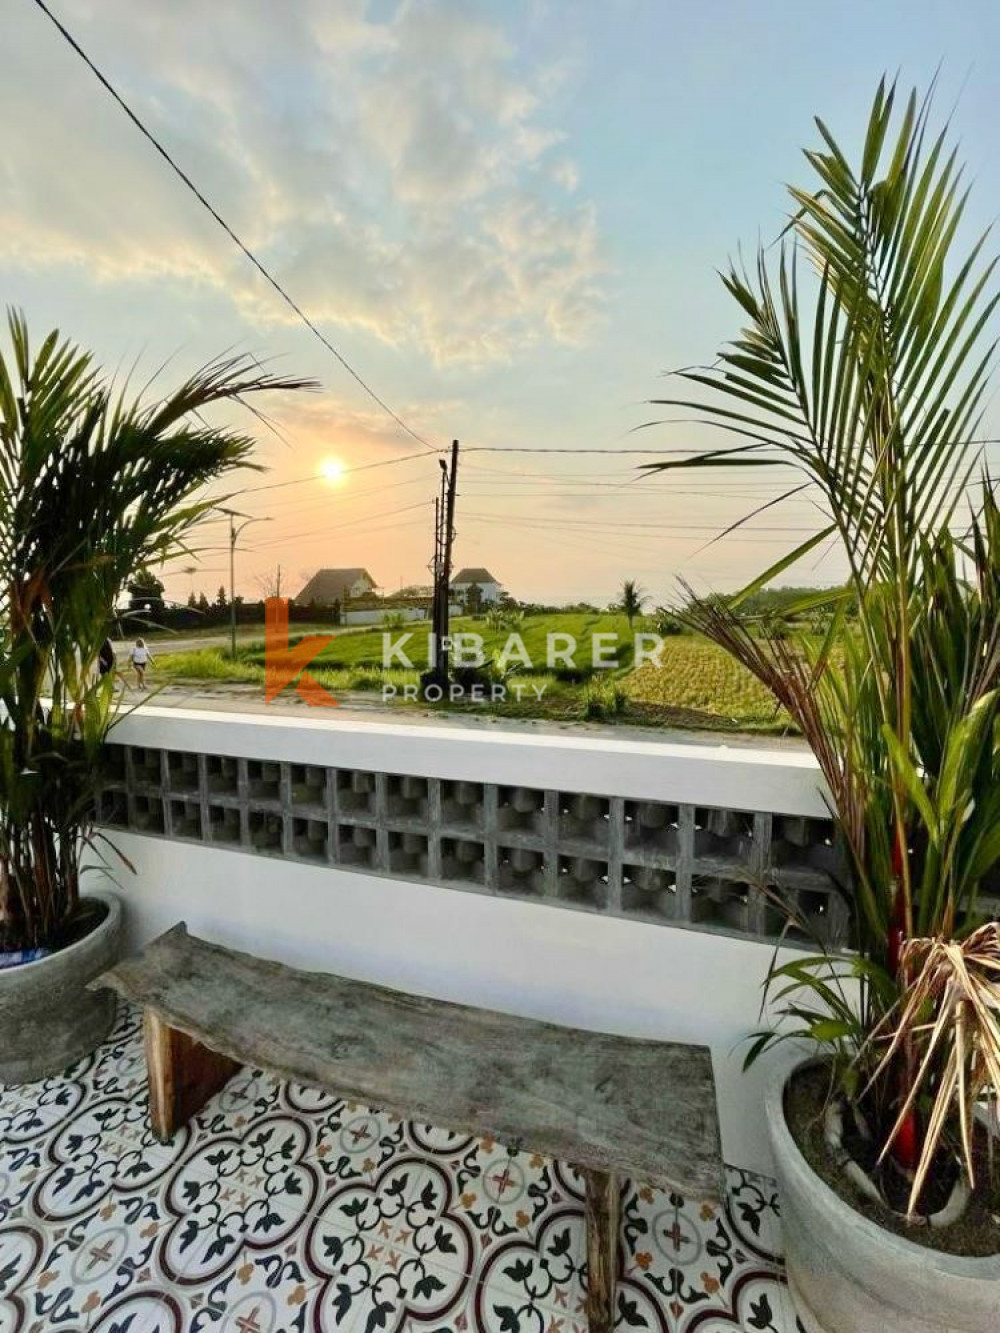 Semi Furnished Three Bedroom Closed Living Villa with Ocean and Rice Field View in Kedungu